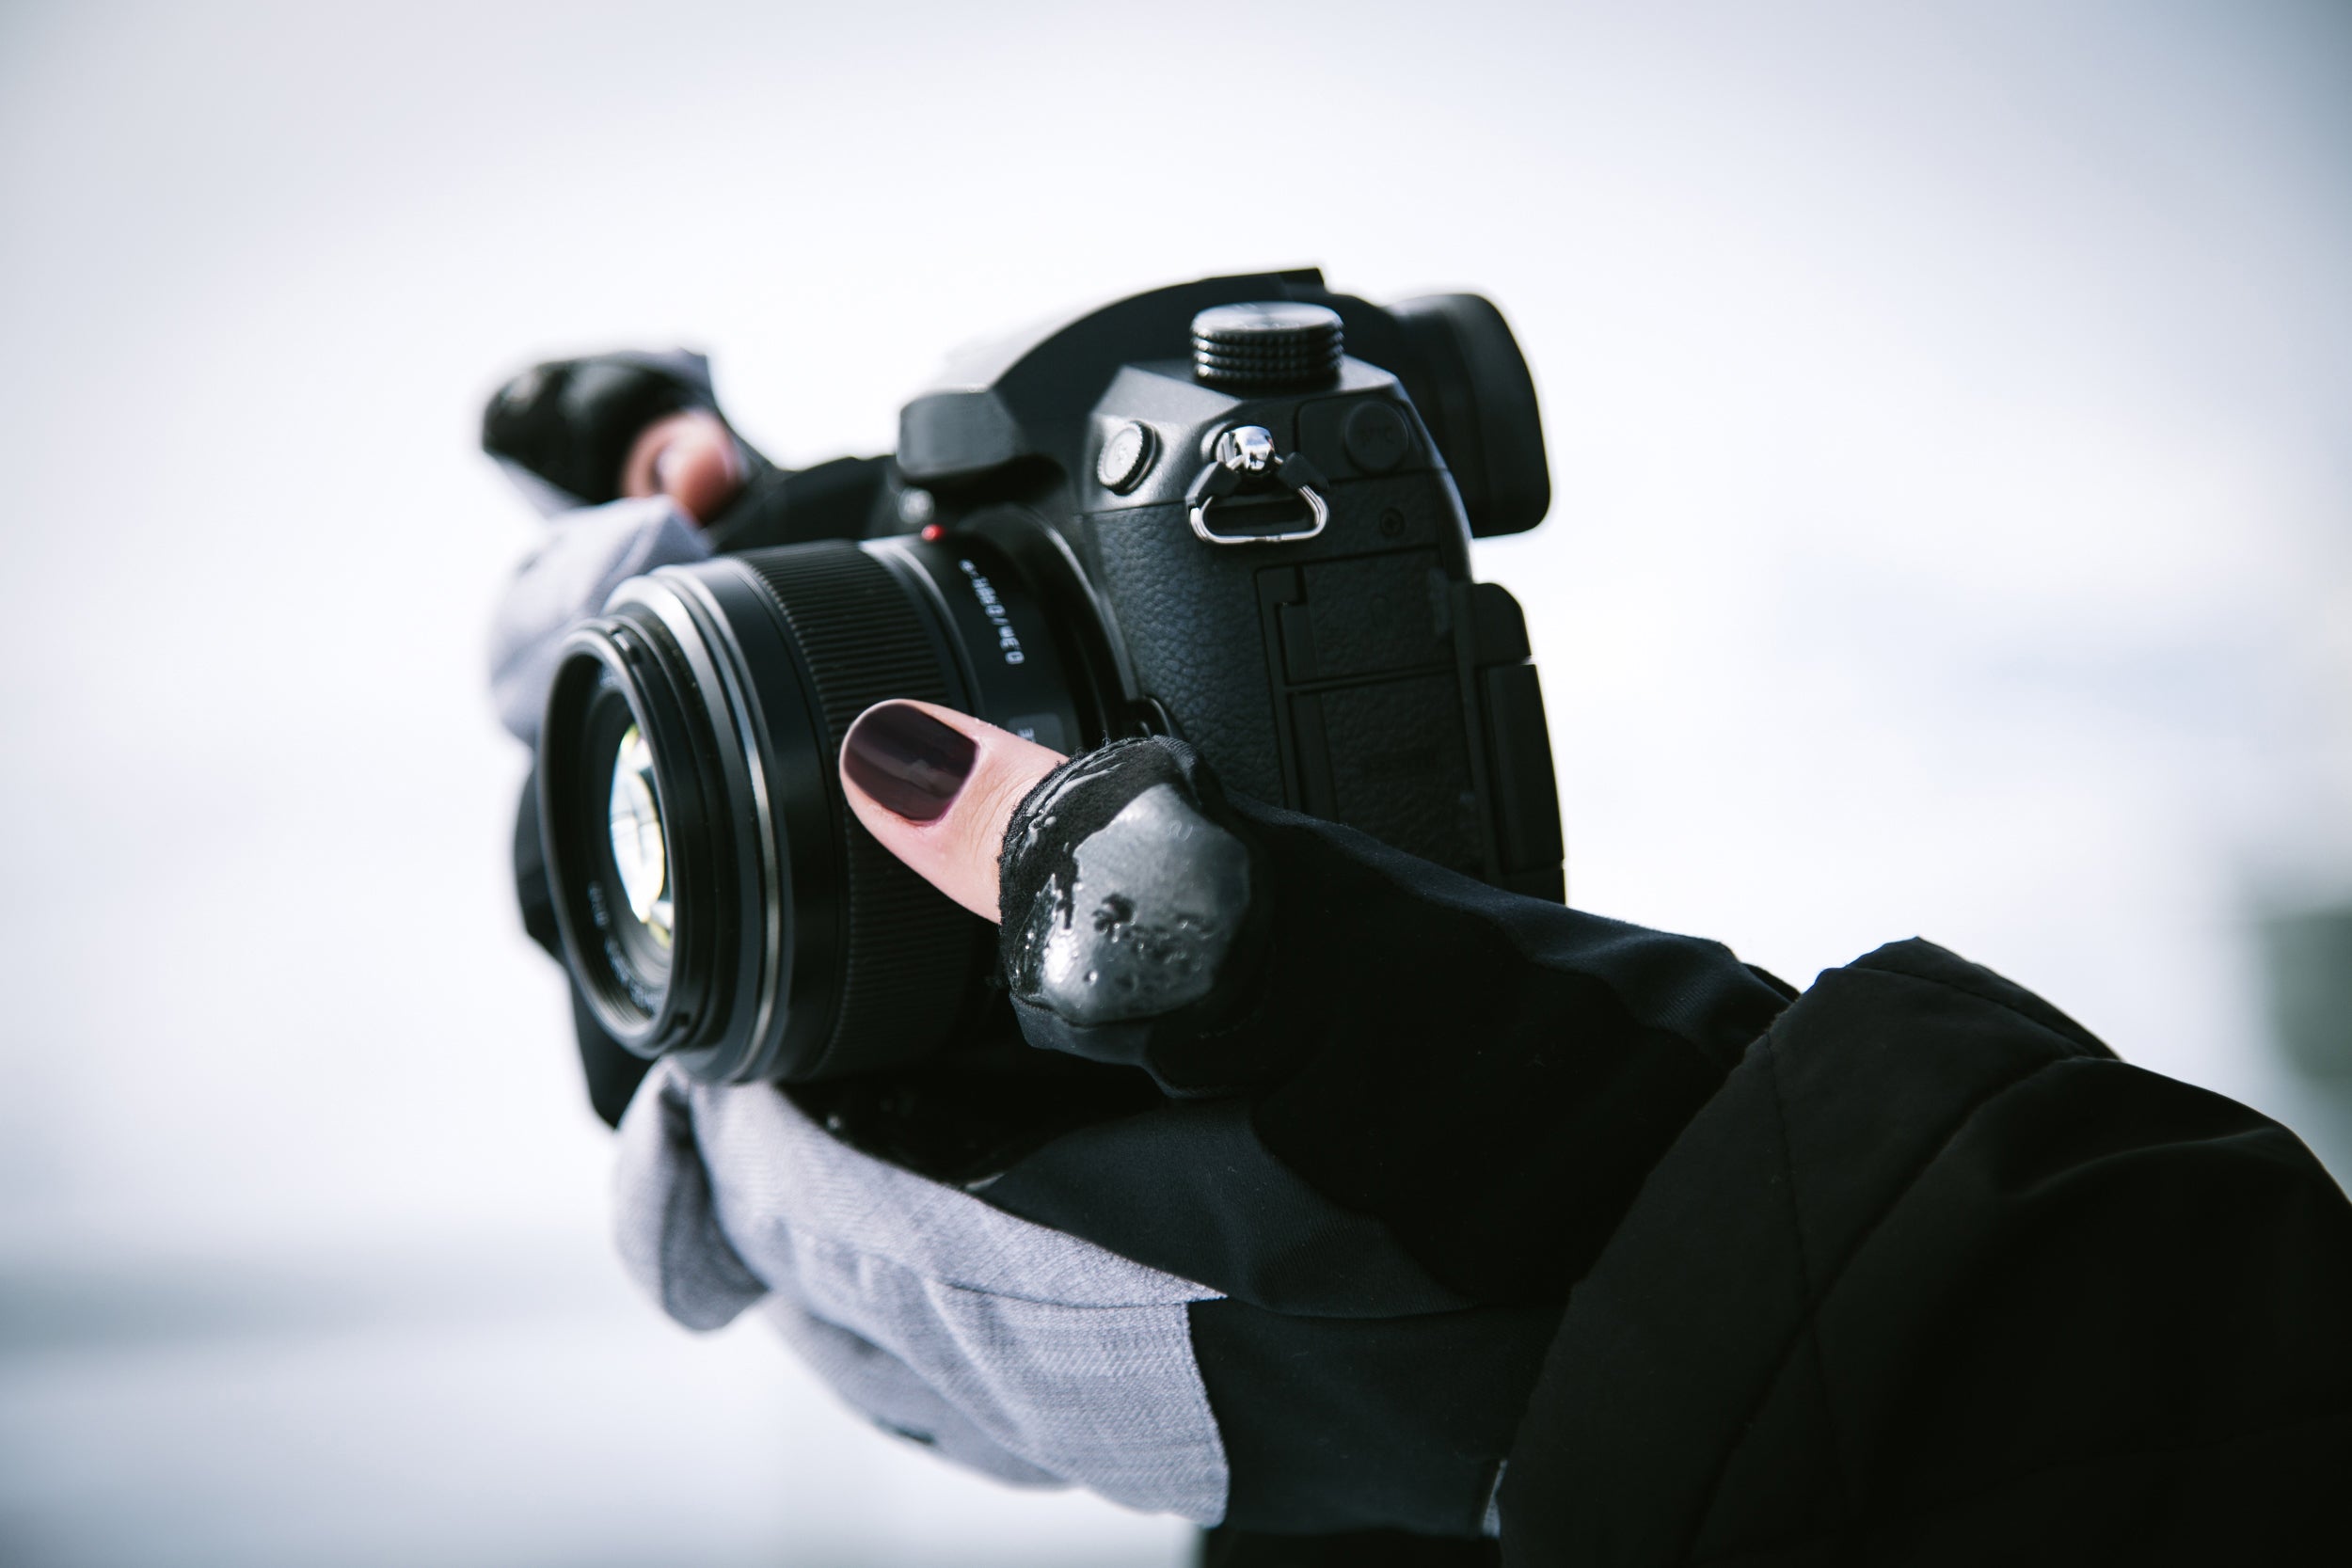 Gloves for winter photography